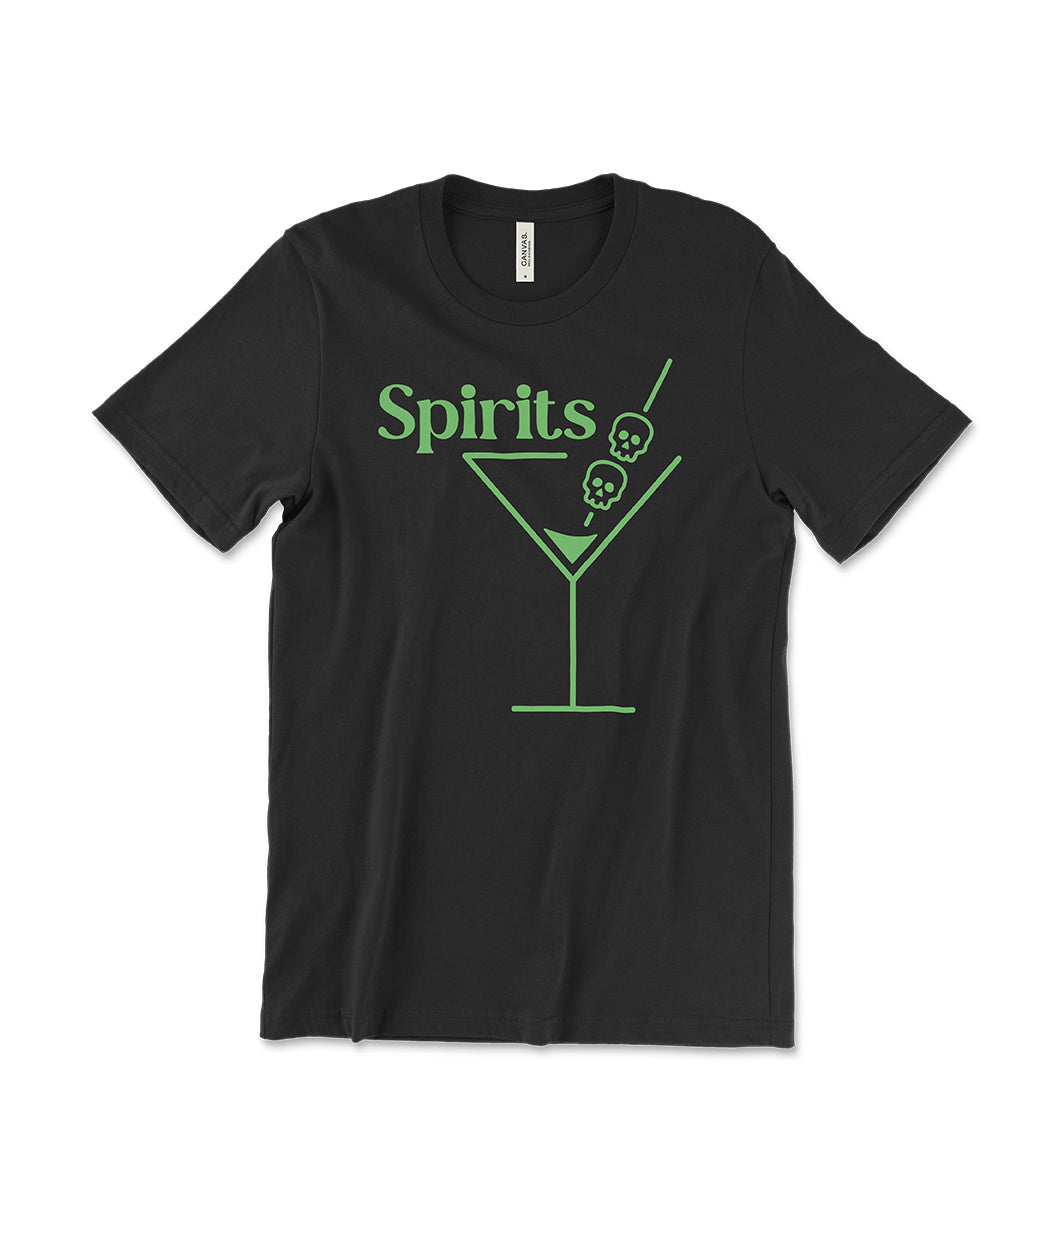 A black t-shirt with bright green test that reads Spirits and their logo featuring a partially full martini glass with two skulls on the toothpick.